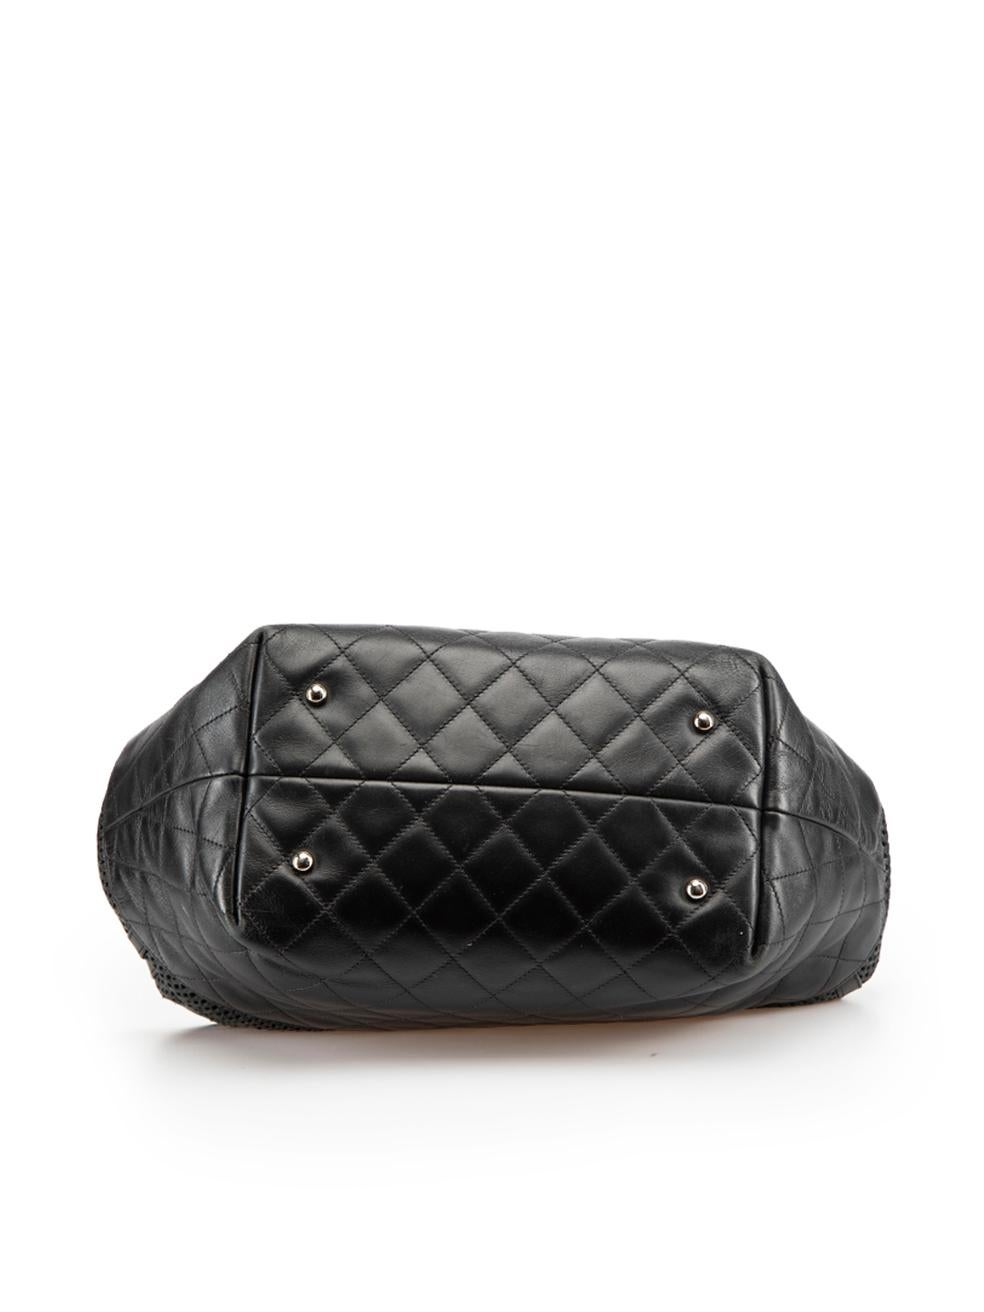 Chanel Women's Black Leather CC Up In The Air Tote For Sale 1